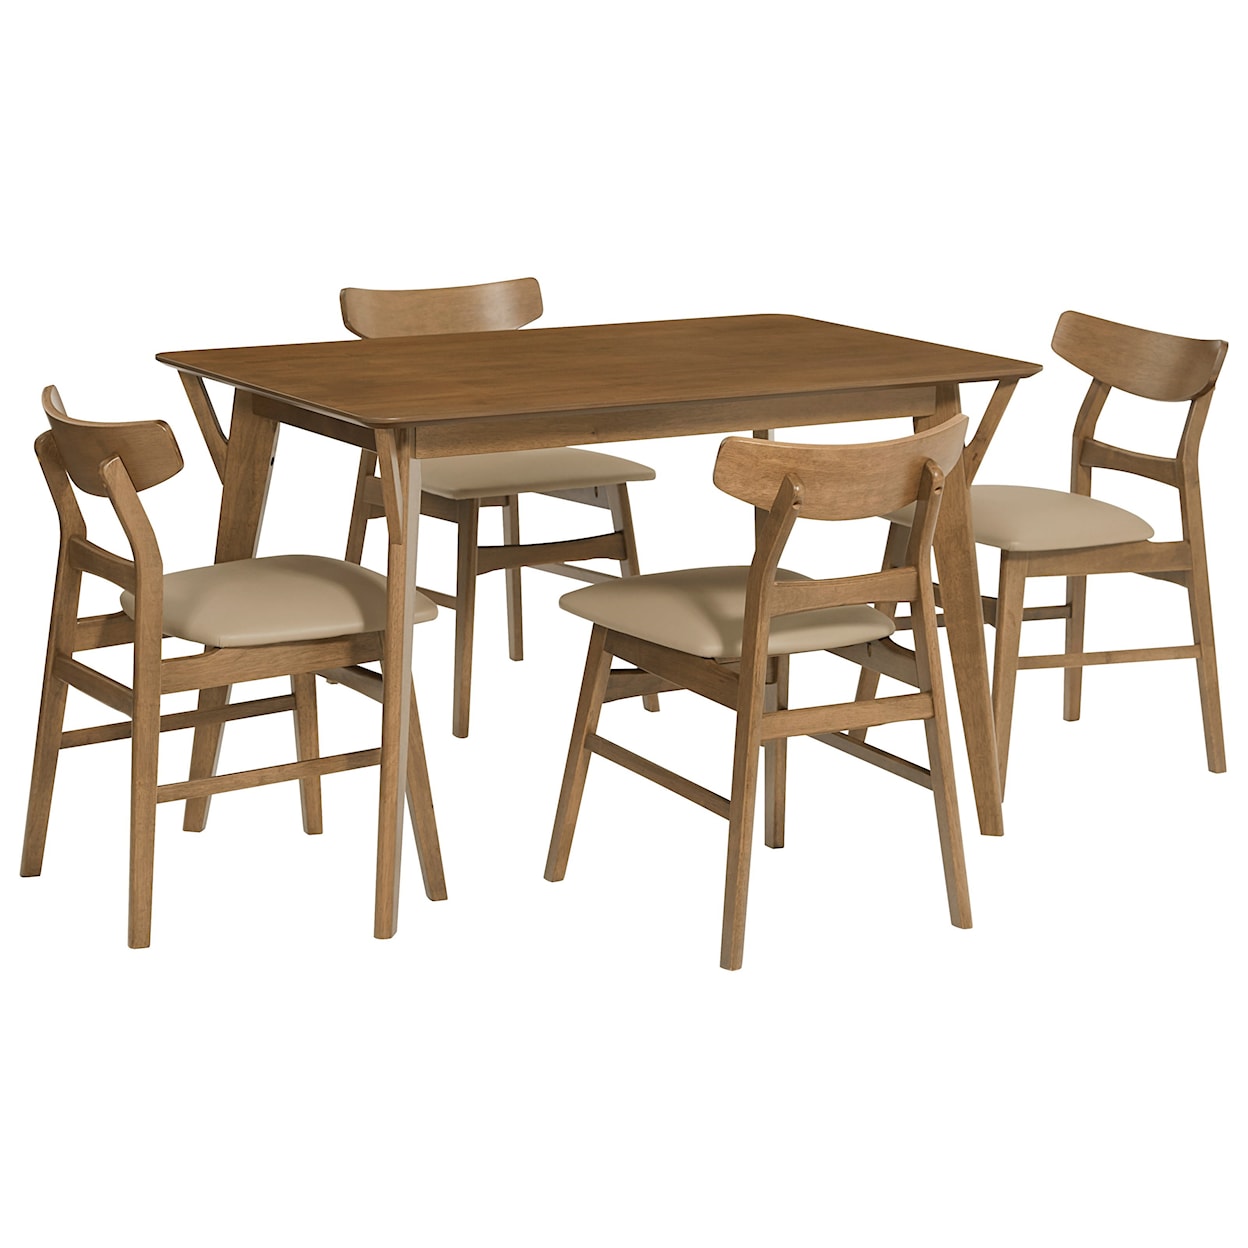 Progressive Furniture Marlow 5-Piece Table and Chair Set